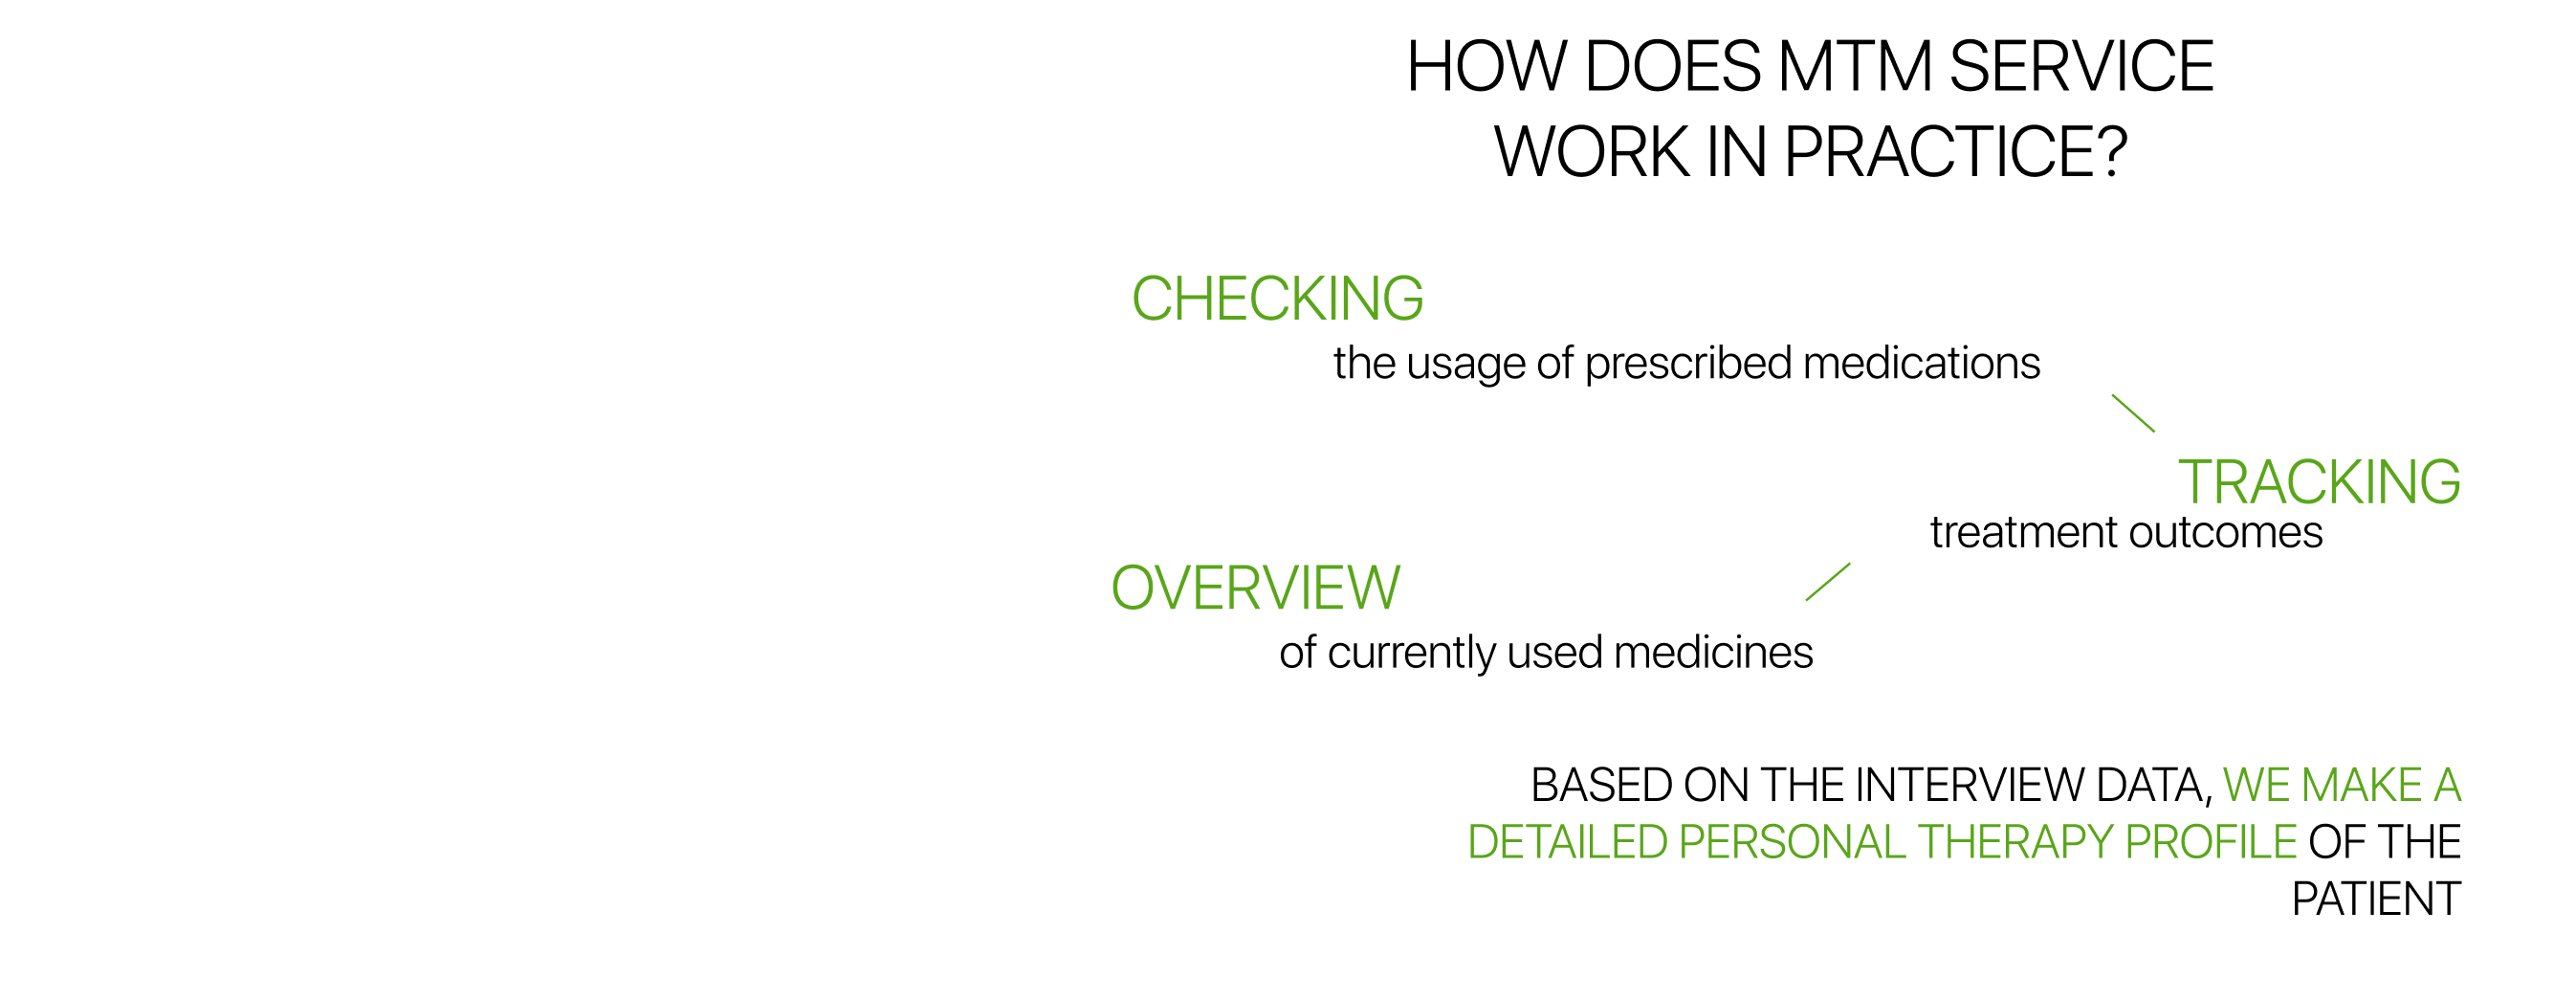 How does medication therapy management service work in practice